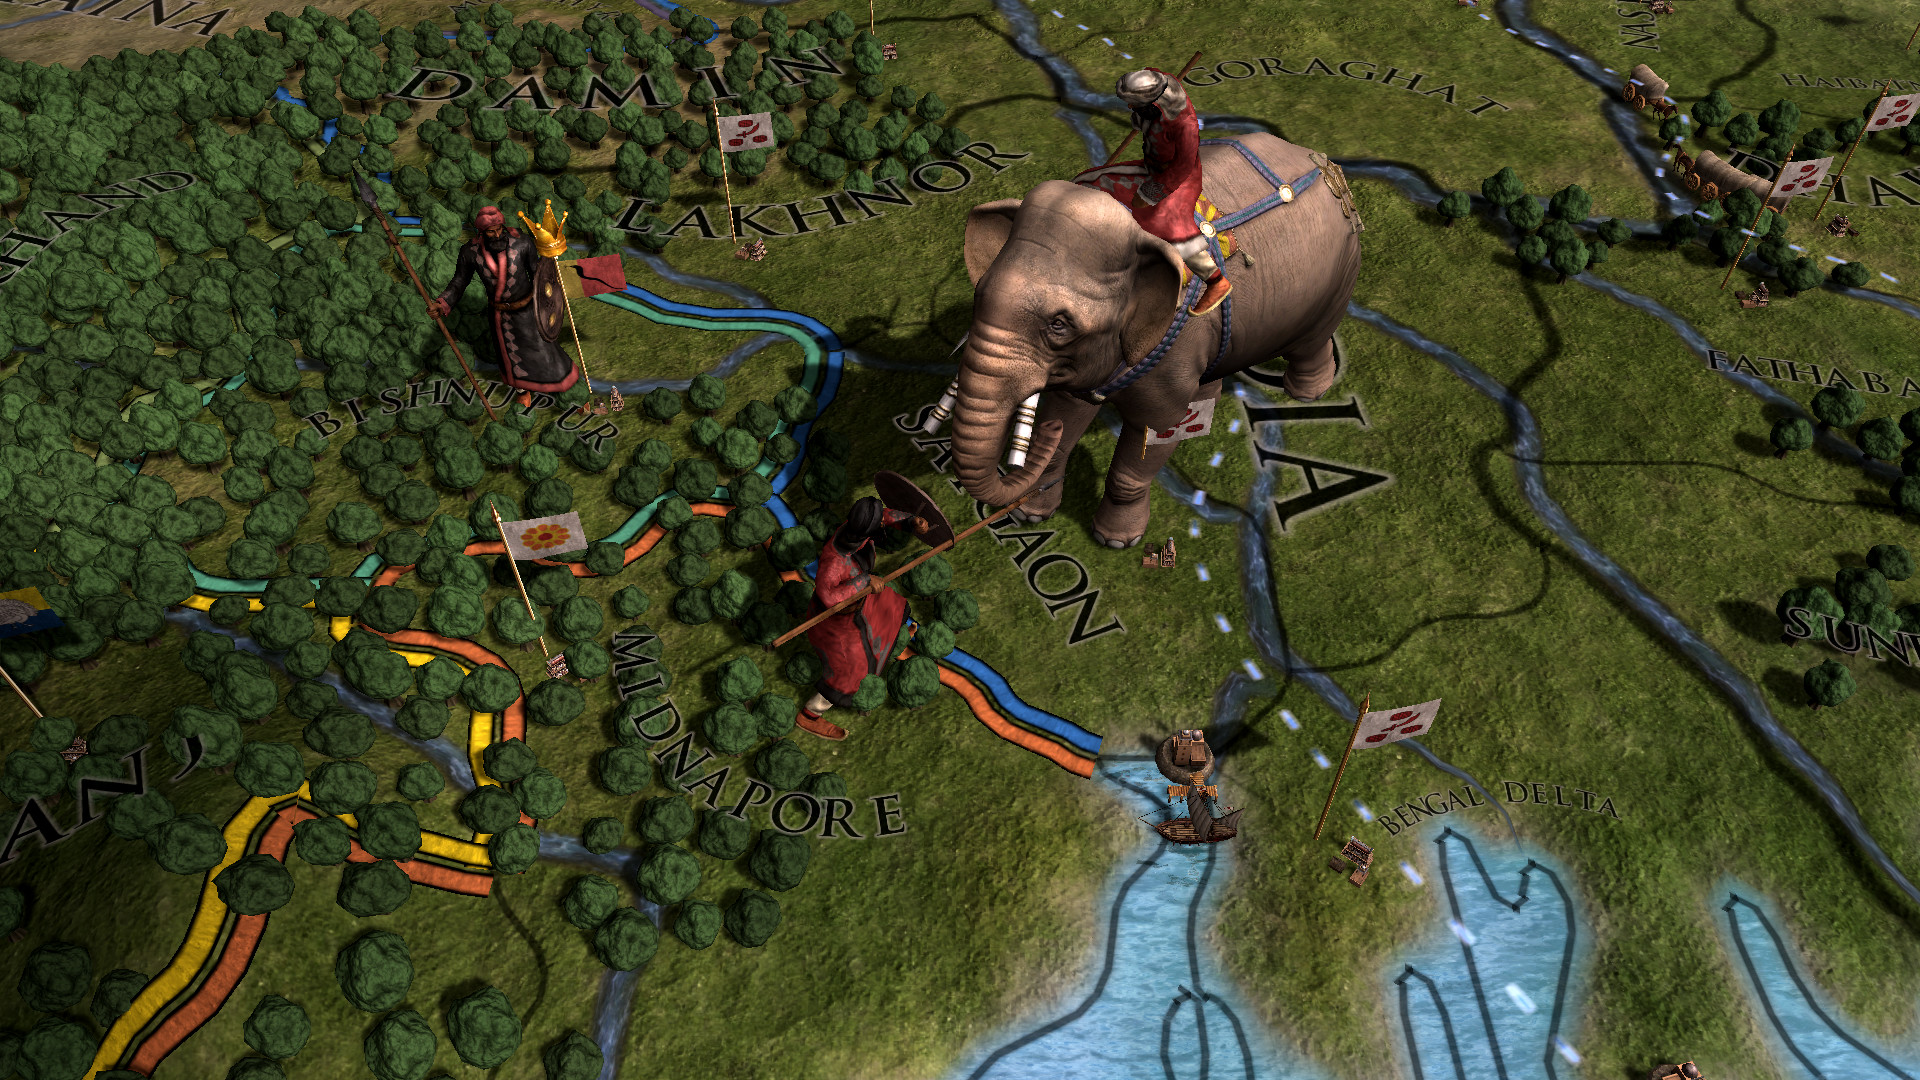 New “Dharma” Expansion Announced for Europa Universalis IV